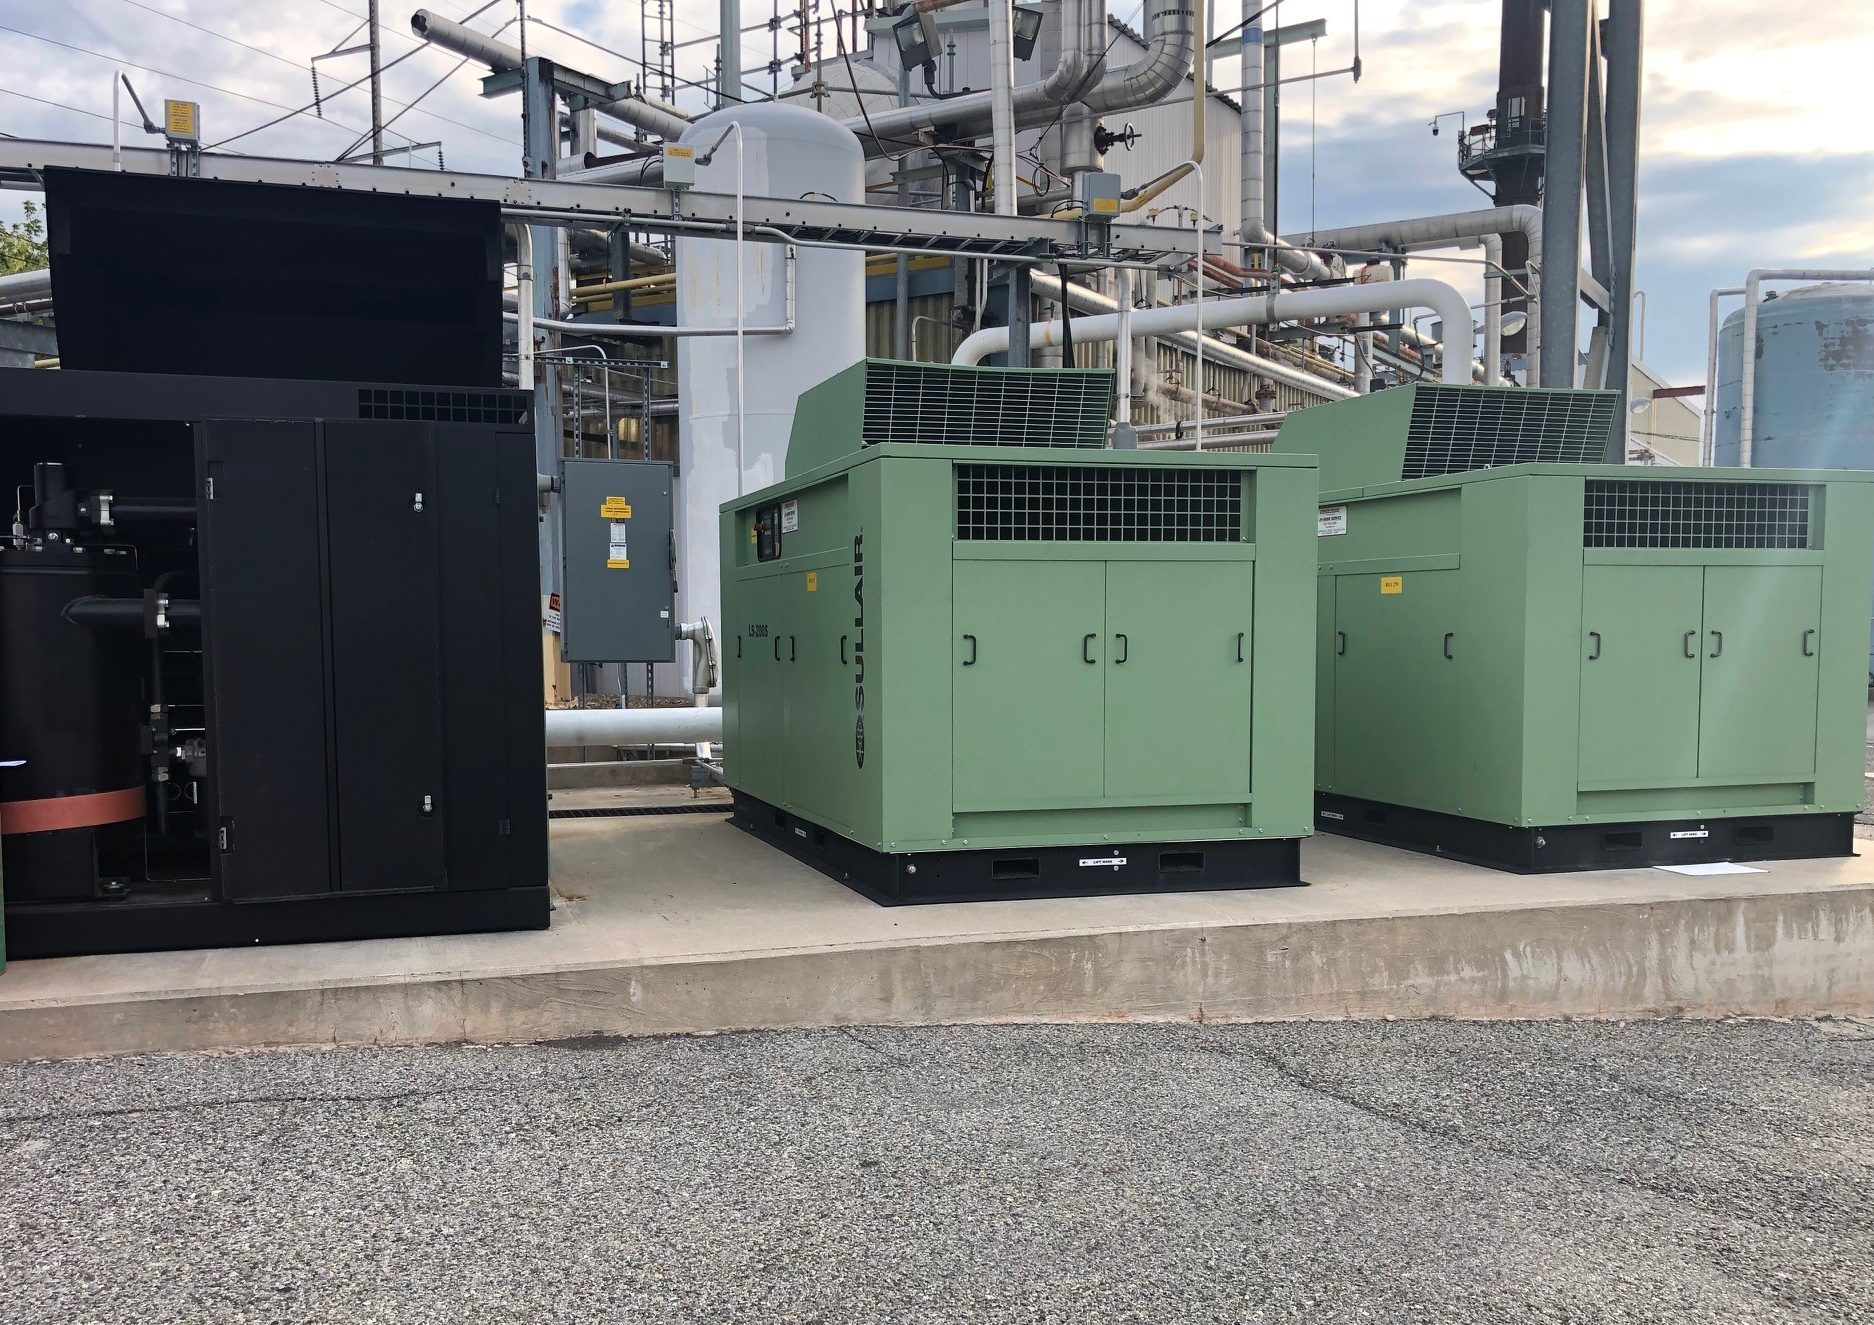 Three Sullair air compressors at local Philadelphia/NJ company provided by Cummins-Wagner.